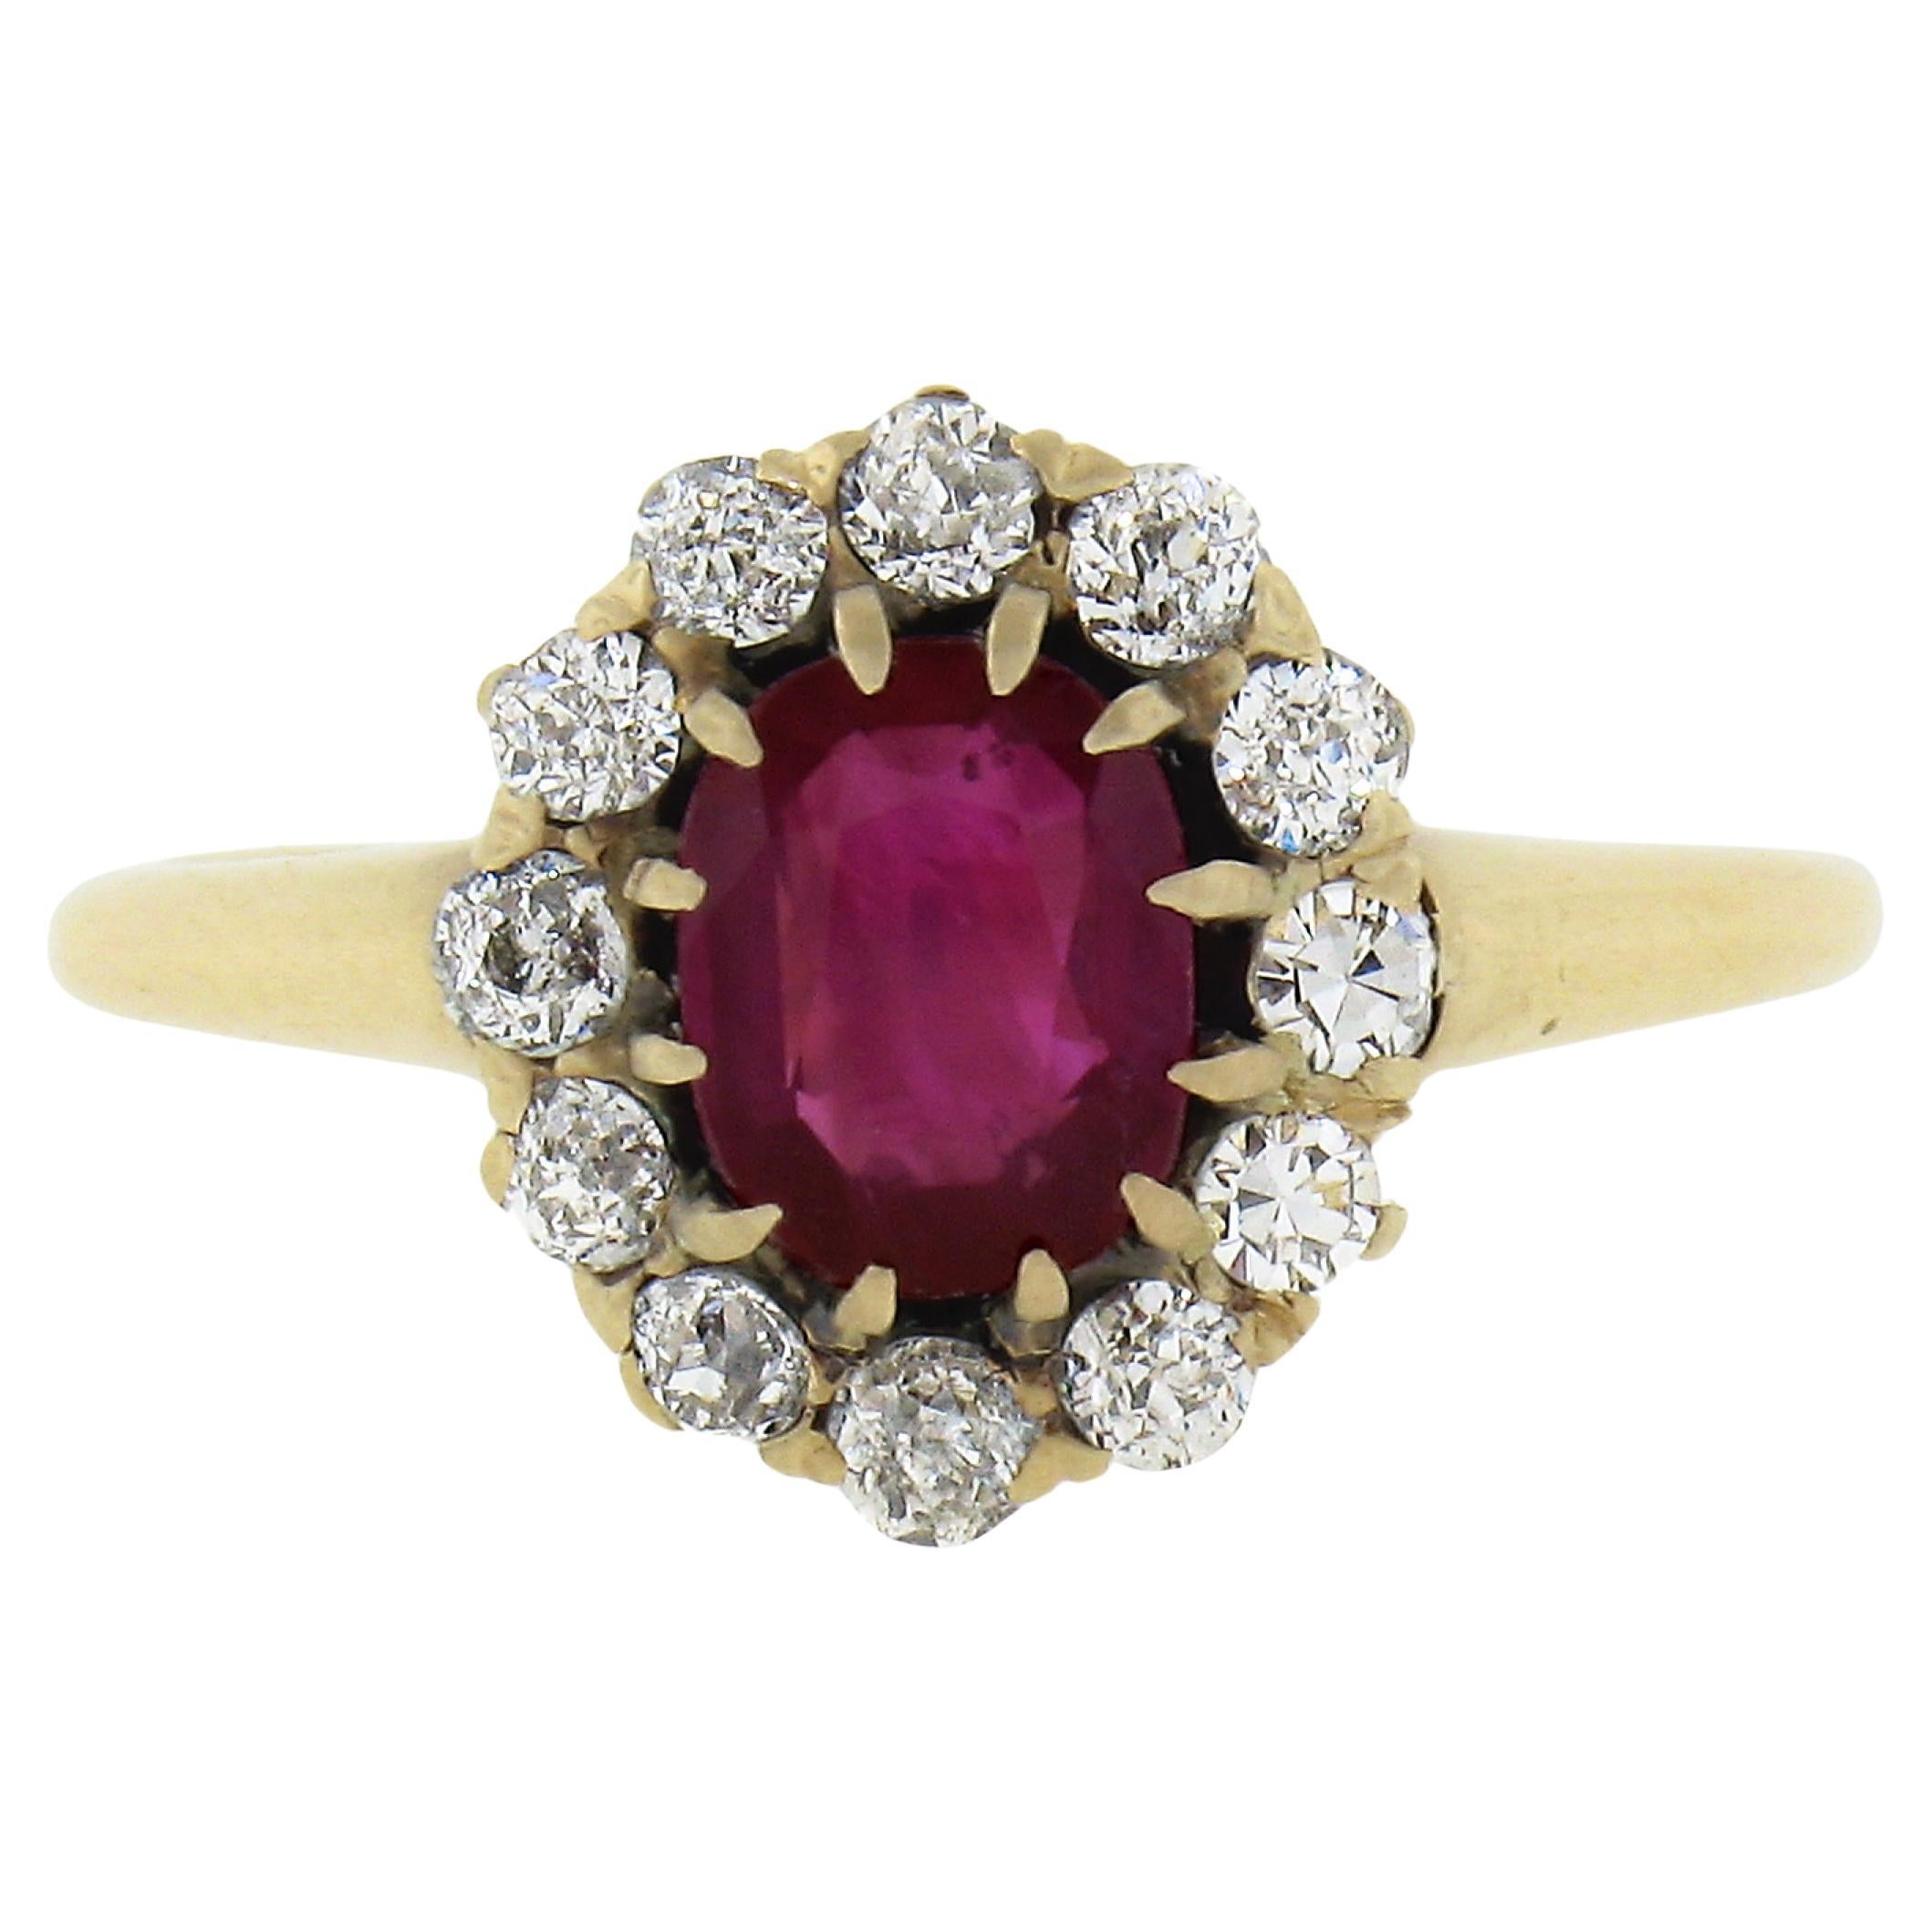 Antique Victorian 14k Gold GIA NO HEAT Oval BURMA Red Ruby & Diamond Halo Ring